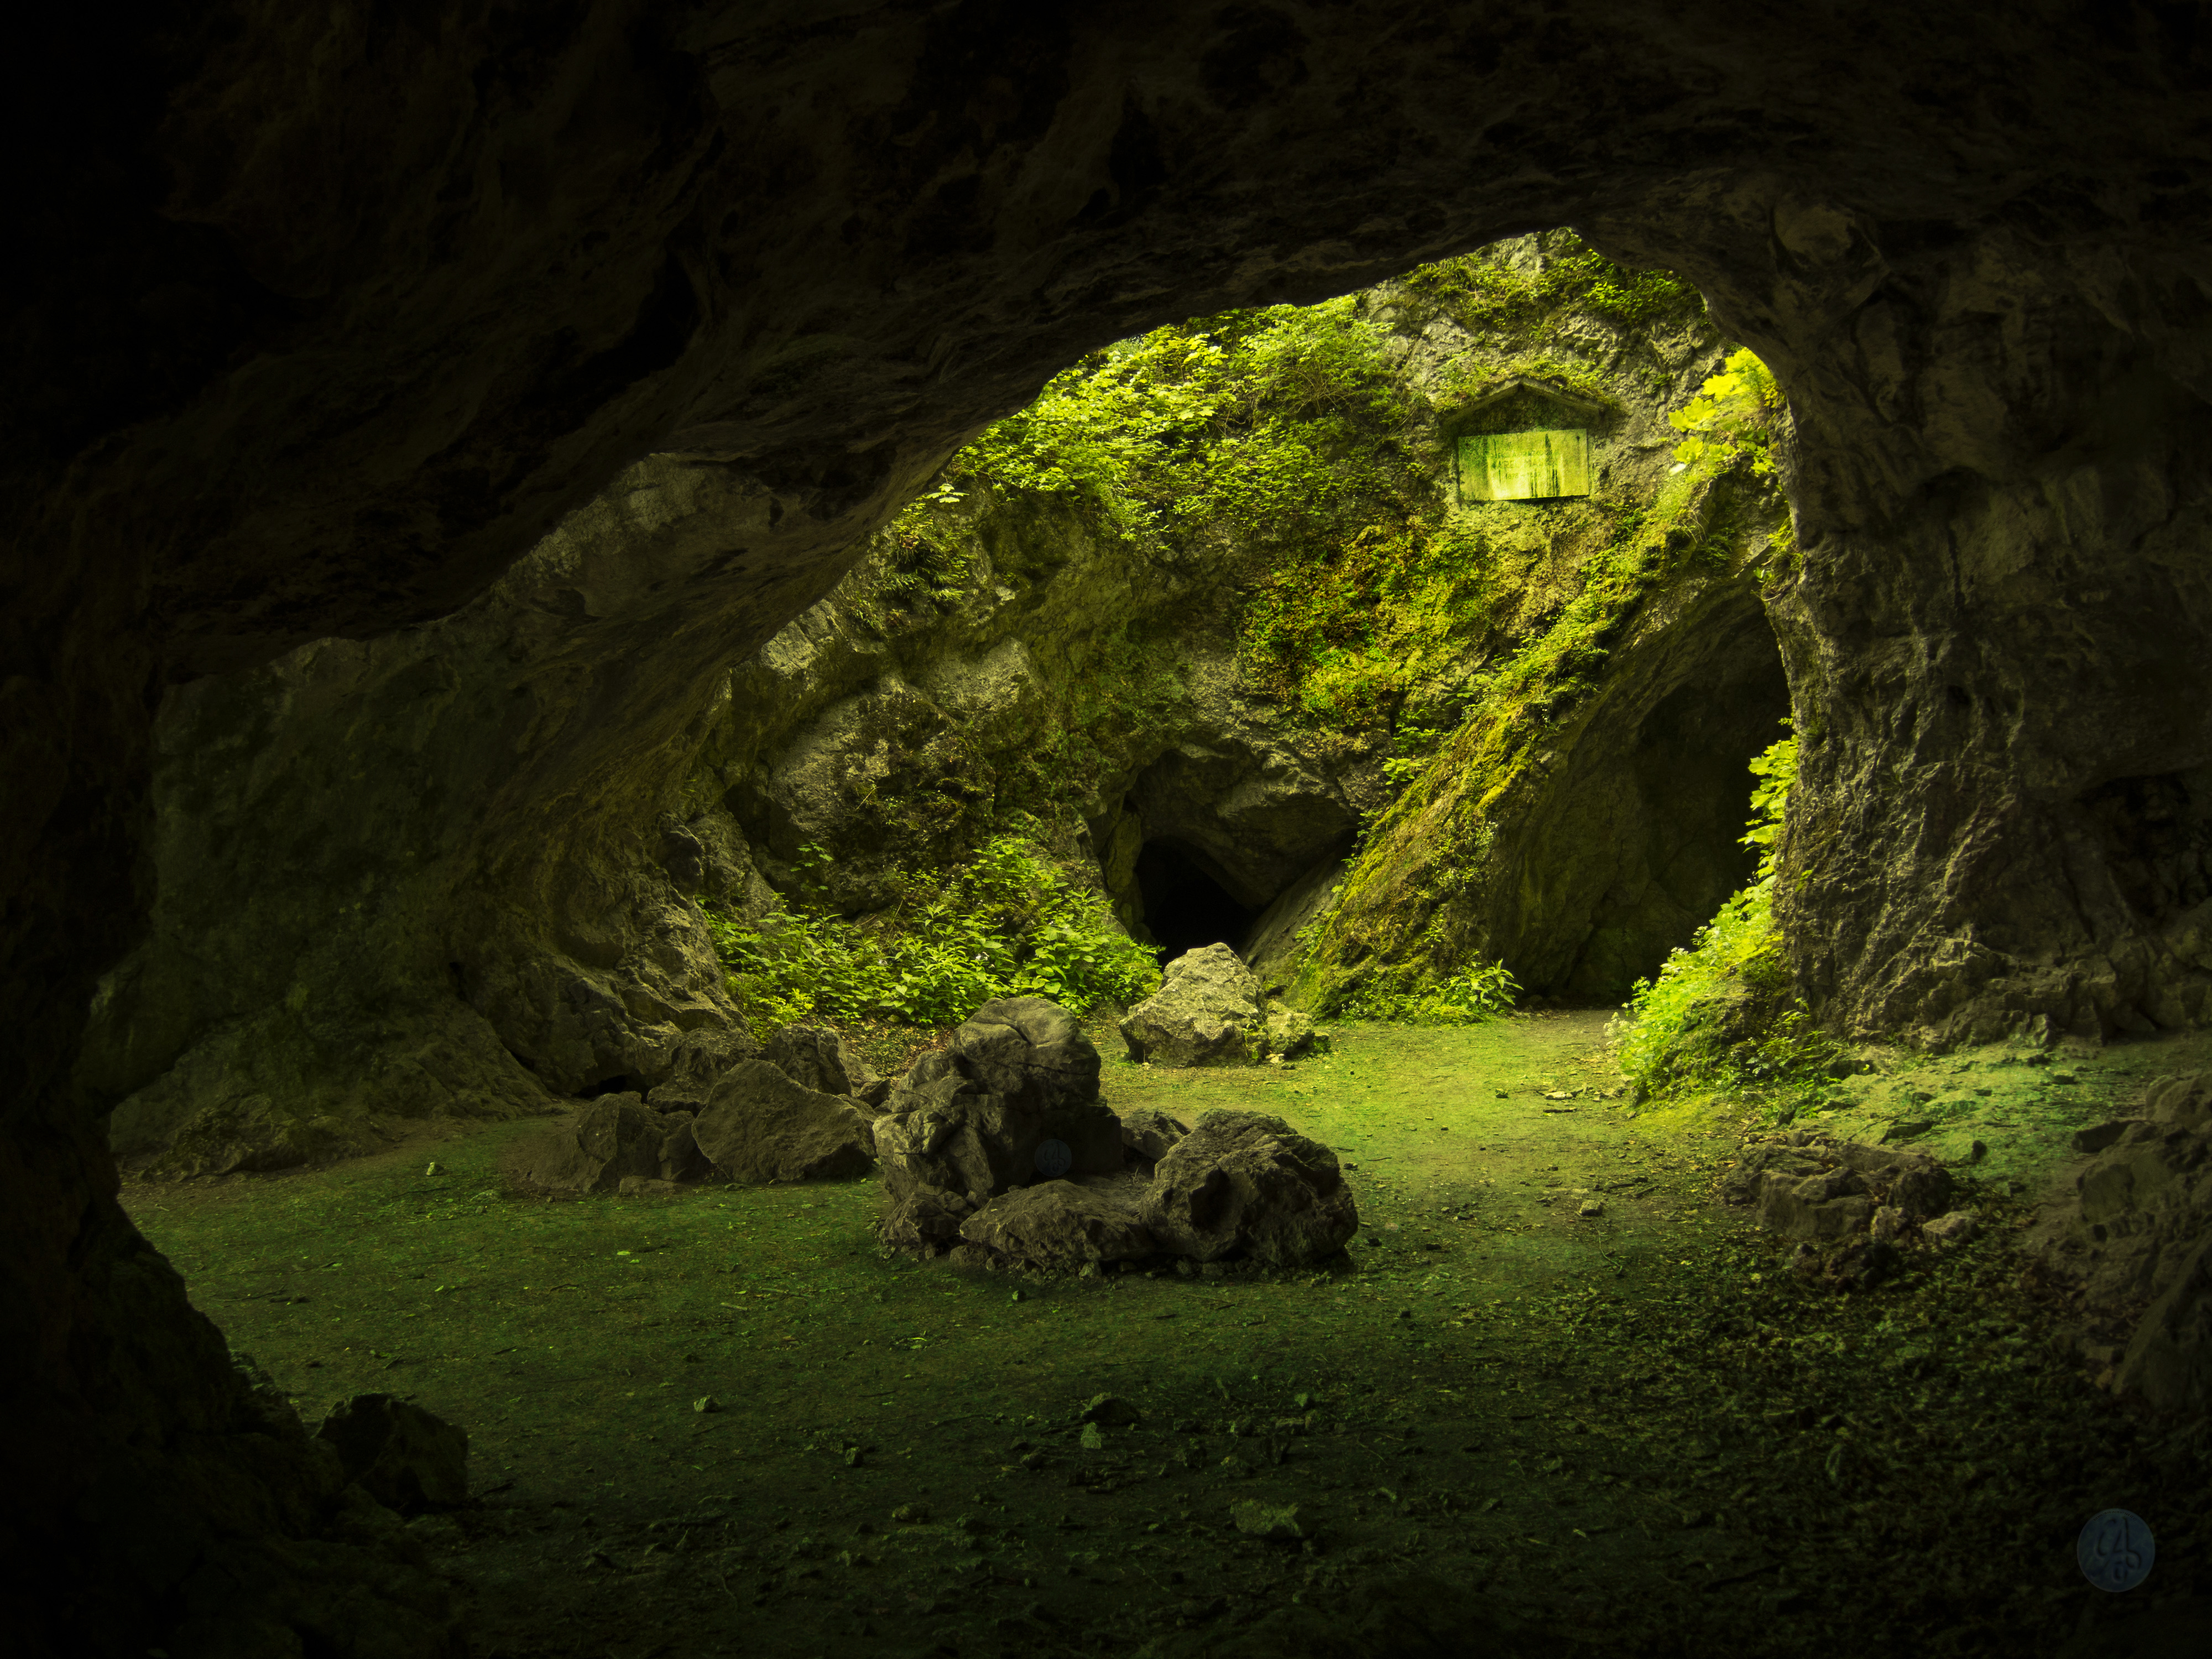 Cave Wallpaper Full Hd Free Download By Aj8 Acro On